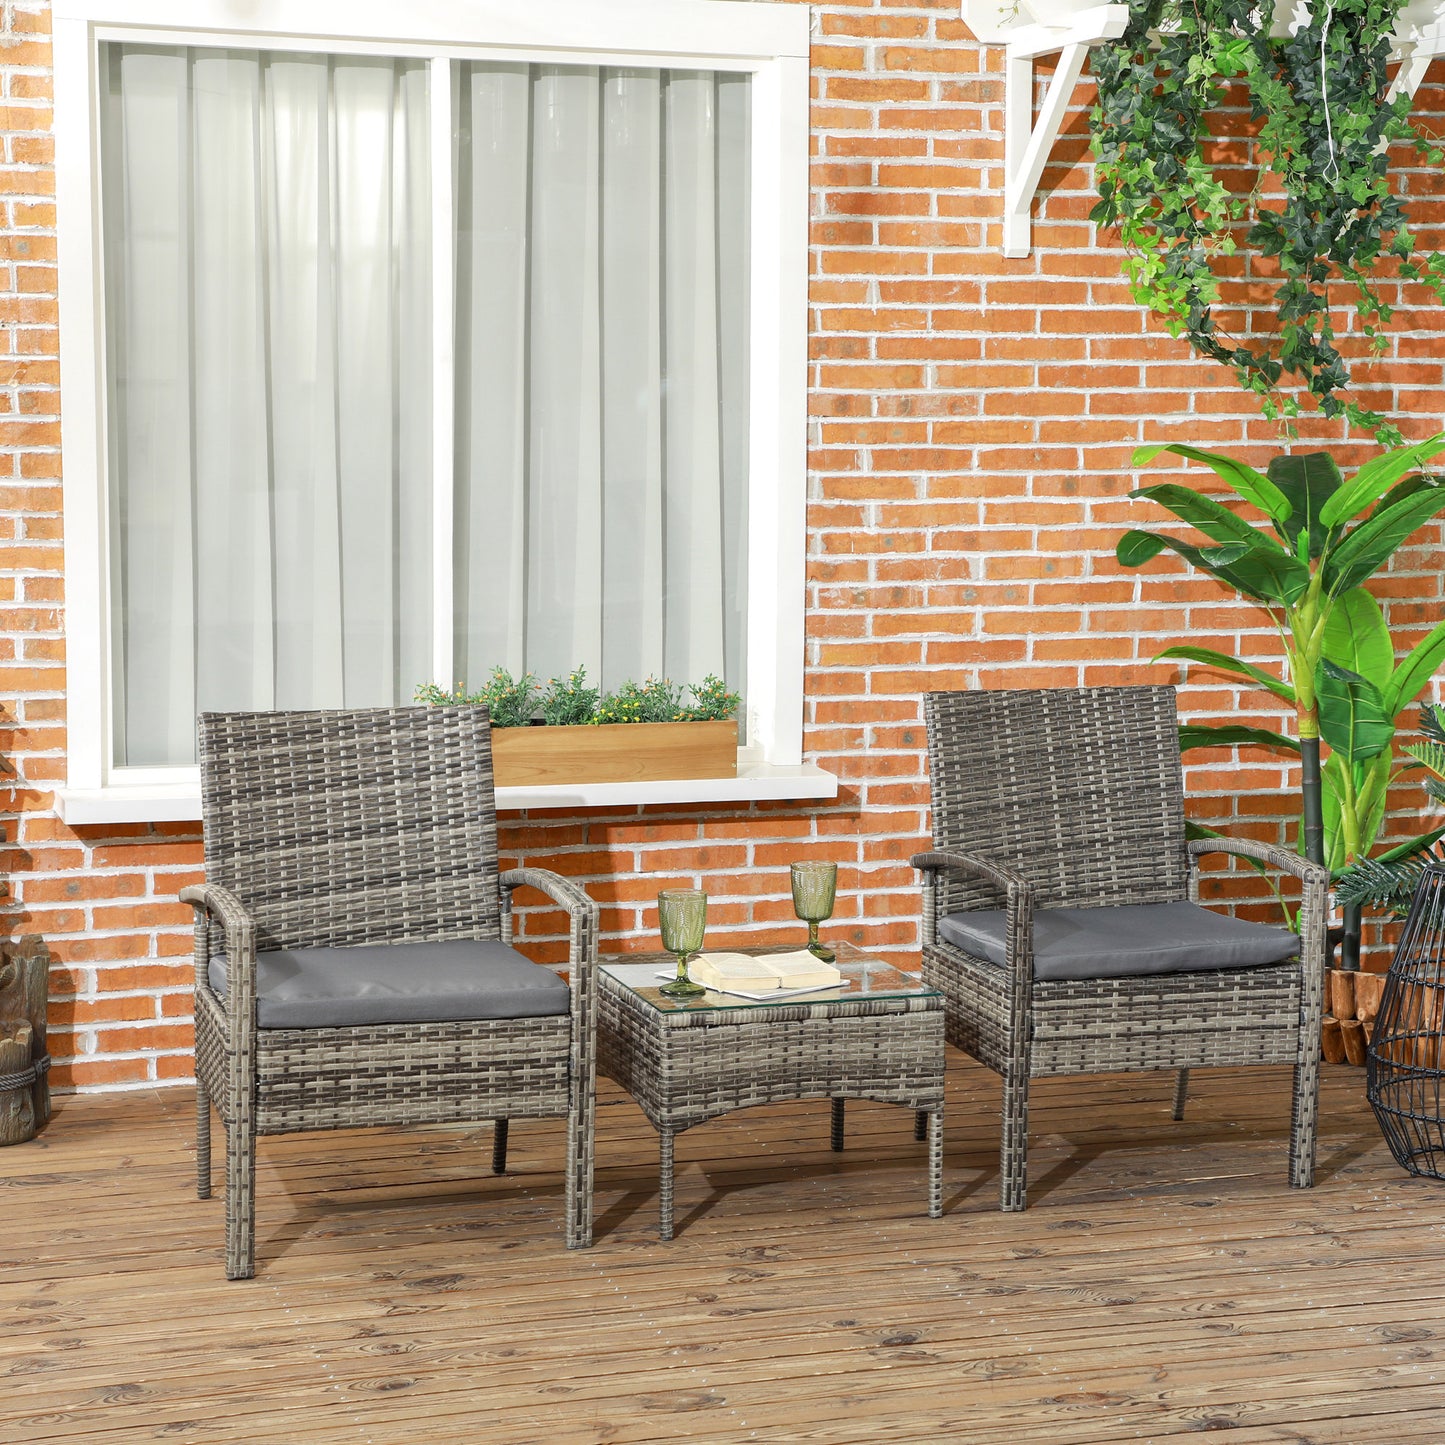 Outsunny 3 Pieces Outdoor Rattan Bistro Set, Patio Wicker Balcony Furniture, Conservatory Sets w/ Coffee Table and Cushioned Chair, Mixed Grey